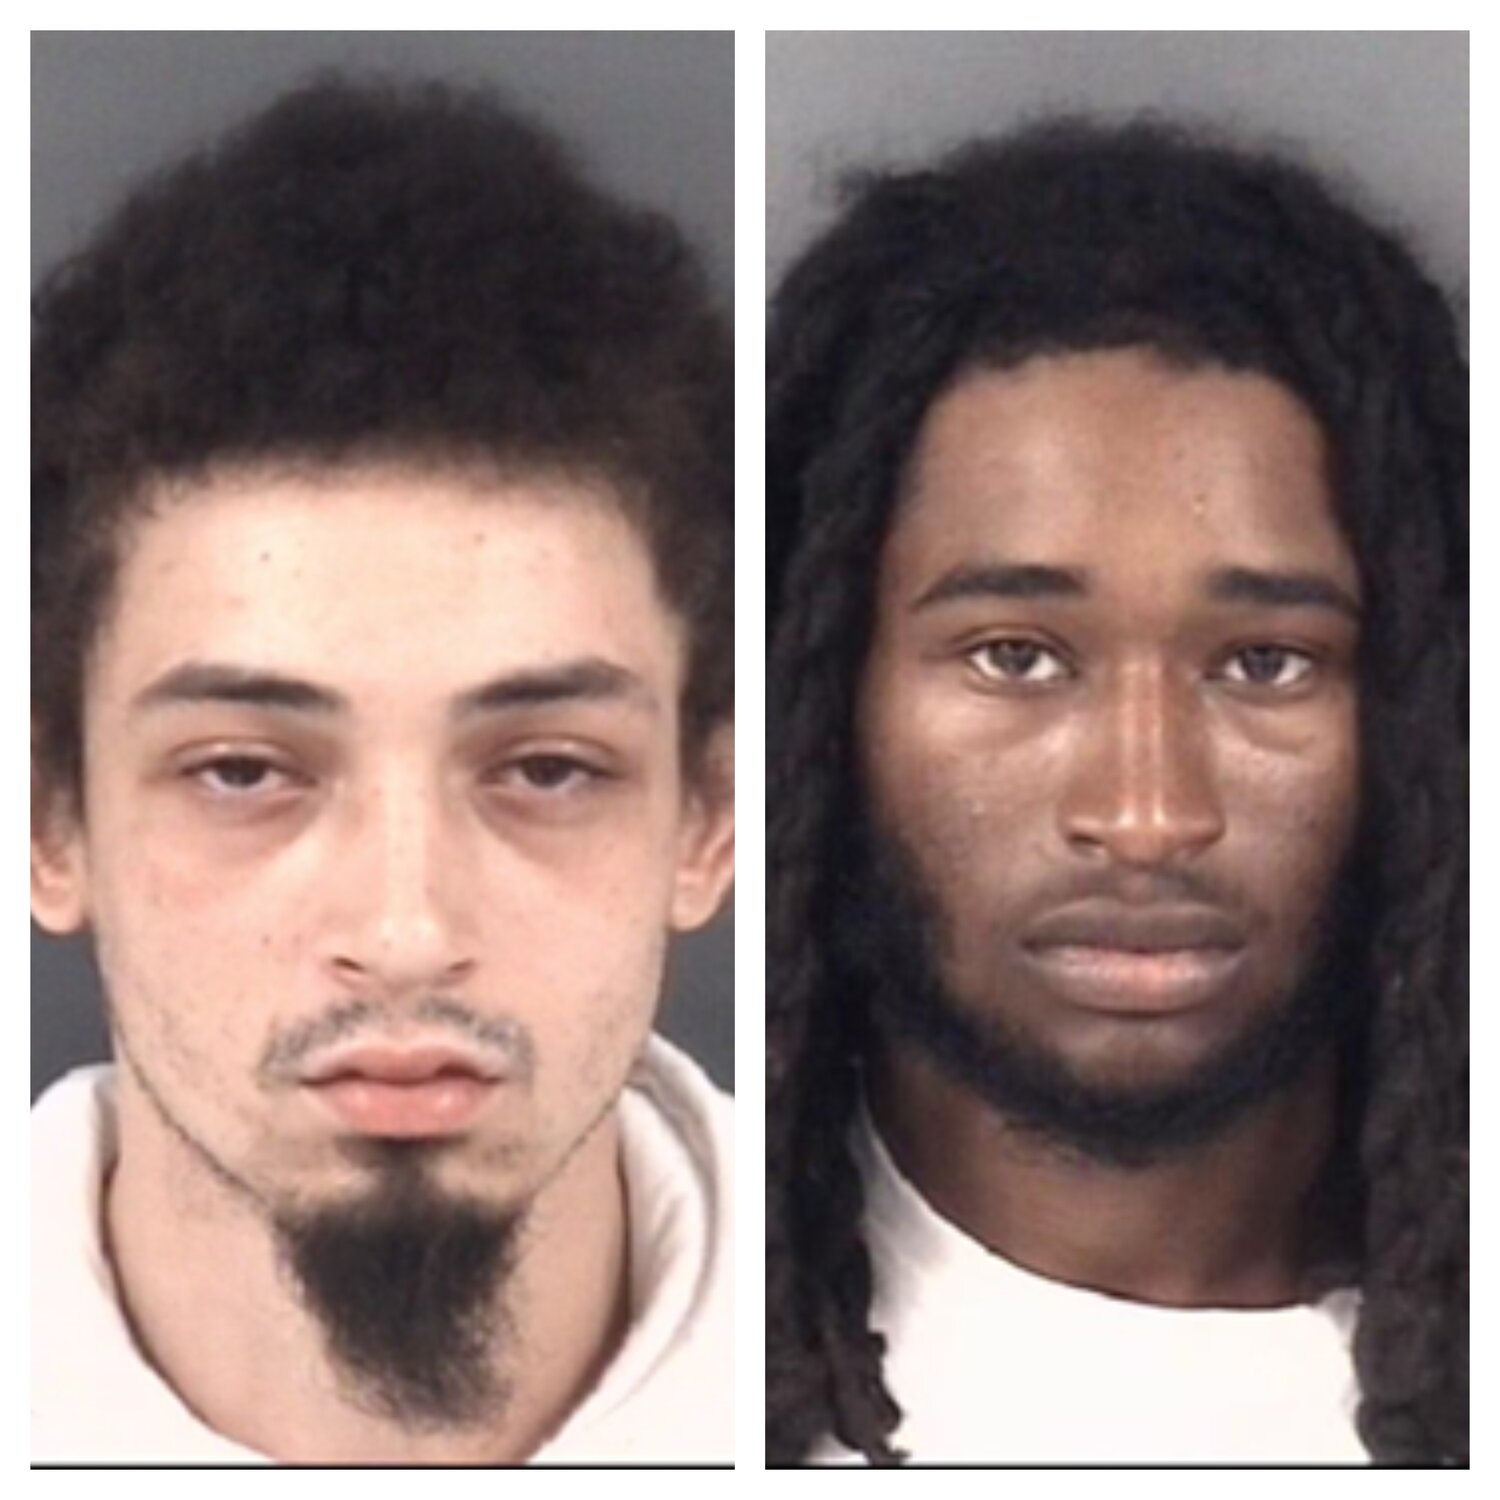 Treshaun Lewis Geddie, 21, left, and Tyrone Demetrius Washington, 21, are charged in the shooting deaths of two men at a Rembrandt Drive home, police say.